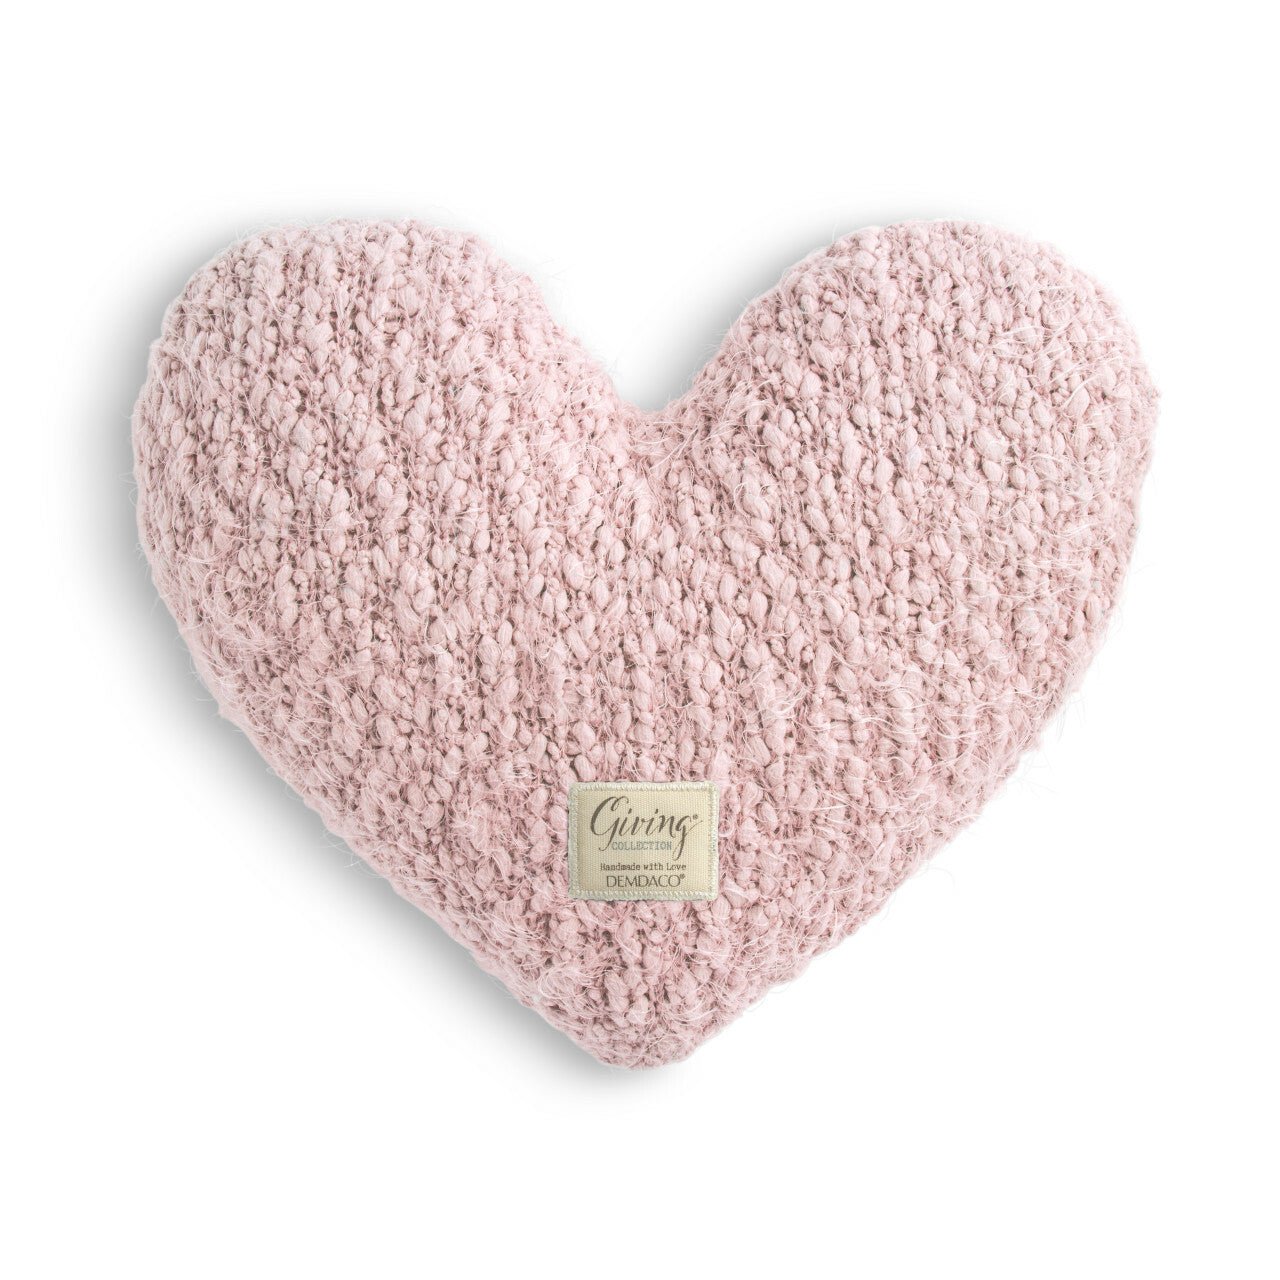 Giving Heart Weighted Pillow Pink